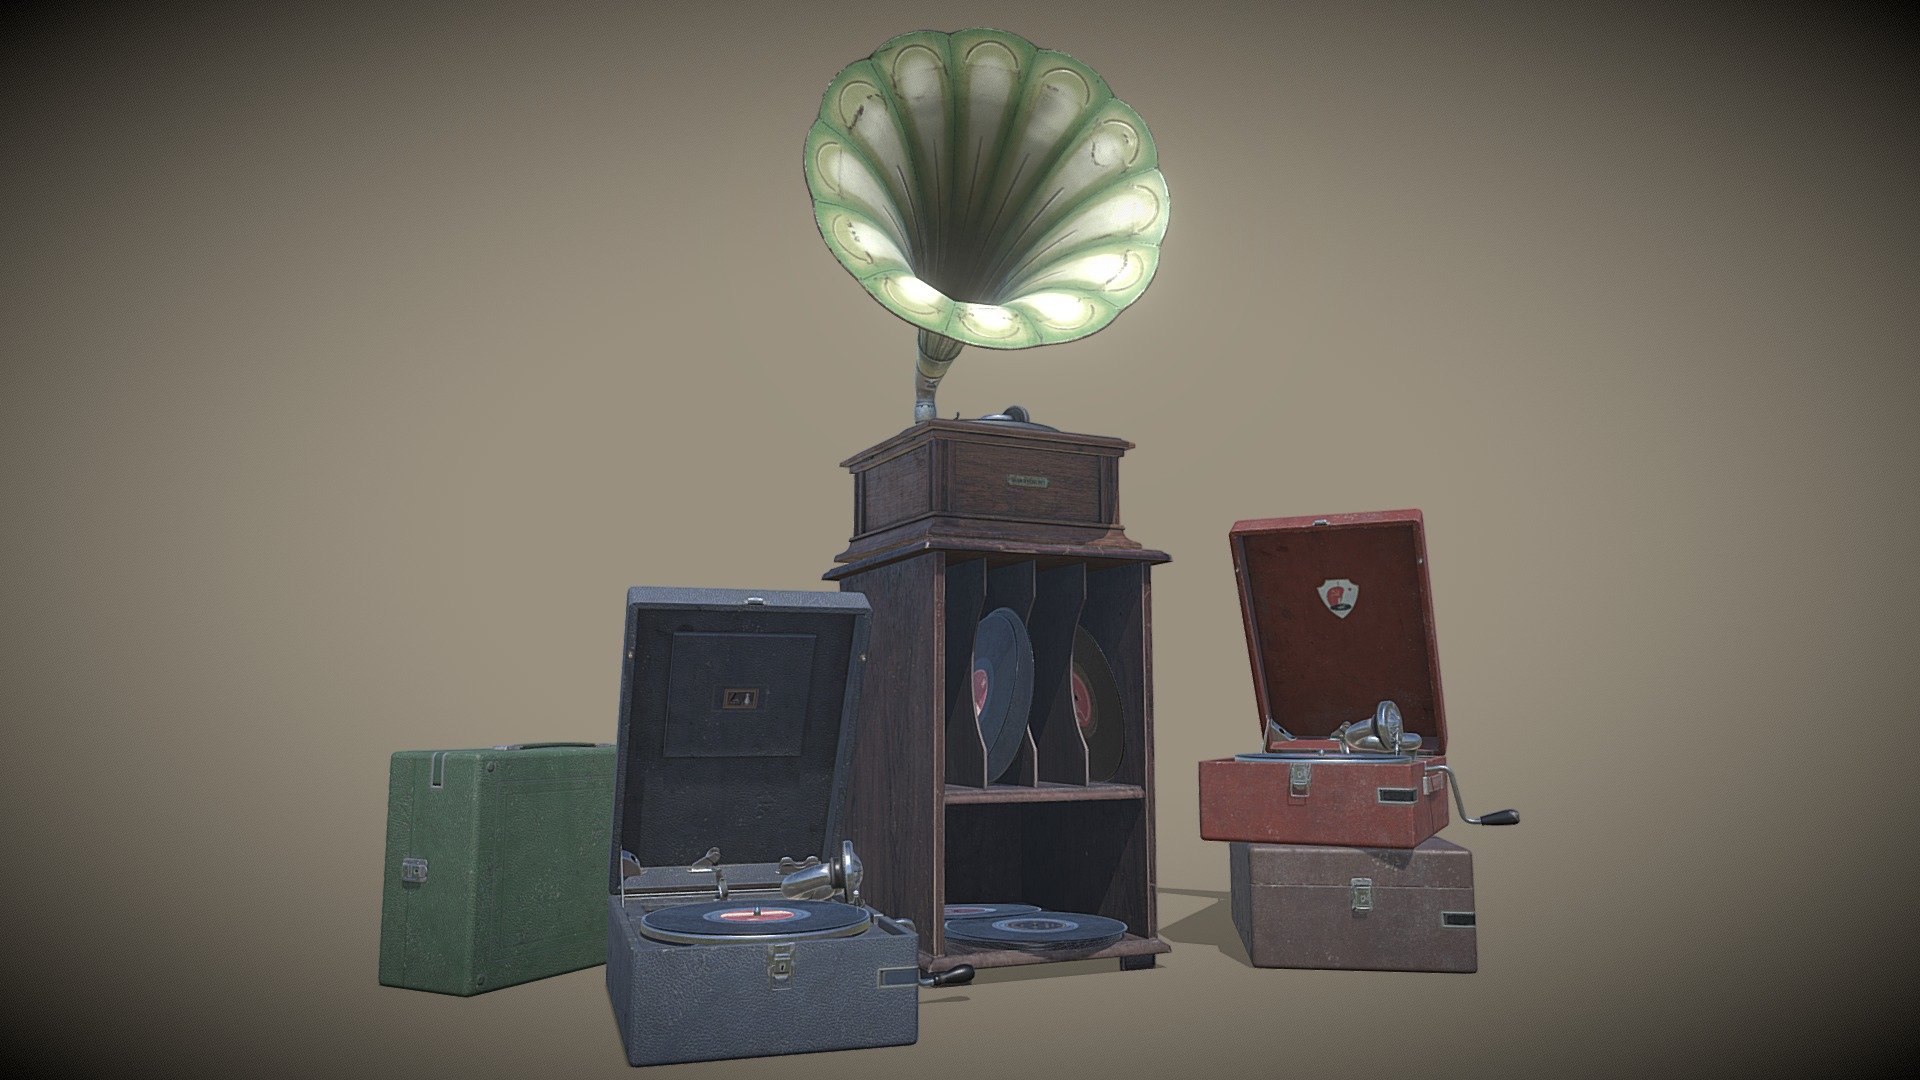 Animated models of antique European gramophone from early 20th century and British/Soviet portable gramophones 40-50 years of XX century

Polycount:

Animated gramophones: 5037 - 6031 verts

Closed gramophones: 889 - 947 verts

Disk cabinet - 372 verts

Disk - 322 verts

Textures: 1024-2048 Metallic PBR
 - Old Gramophones - 3D model by Aleksey Kozhemyakin (@aleksey-k) 3d model